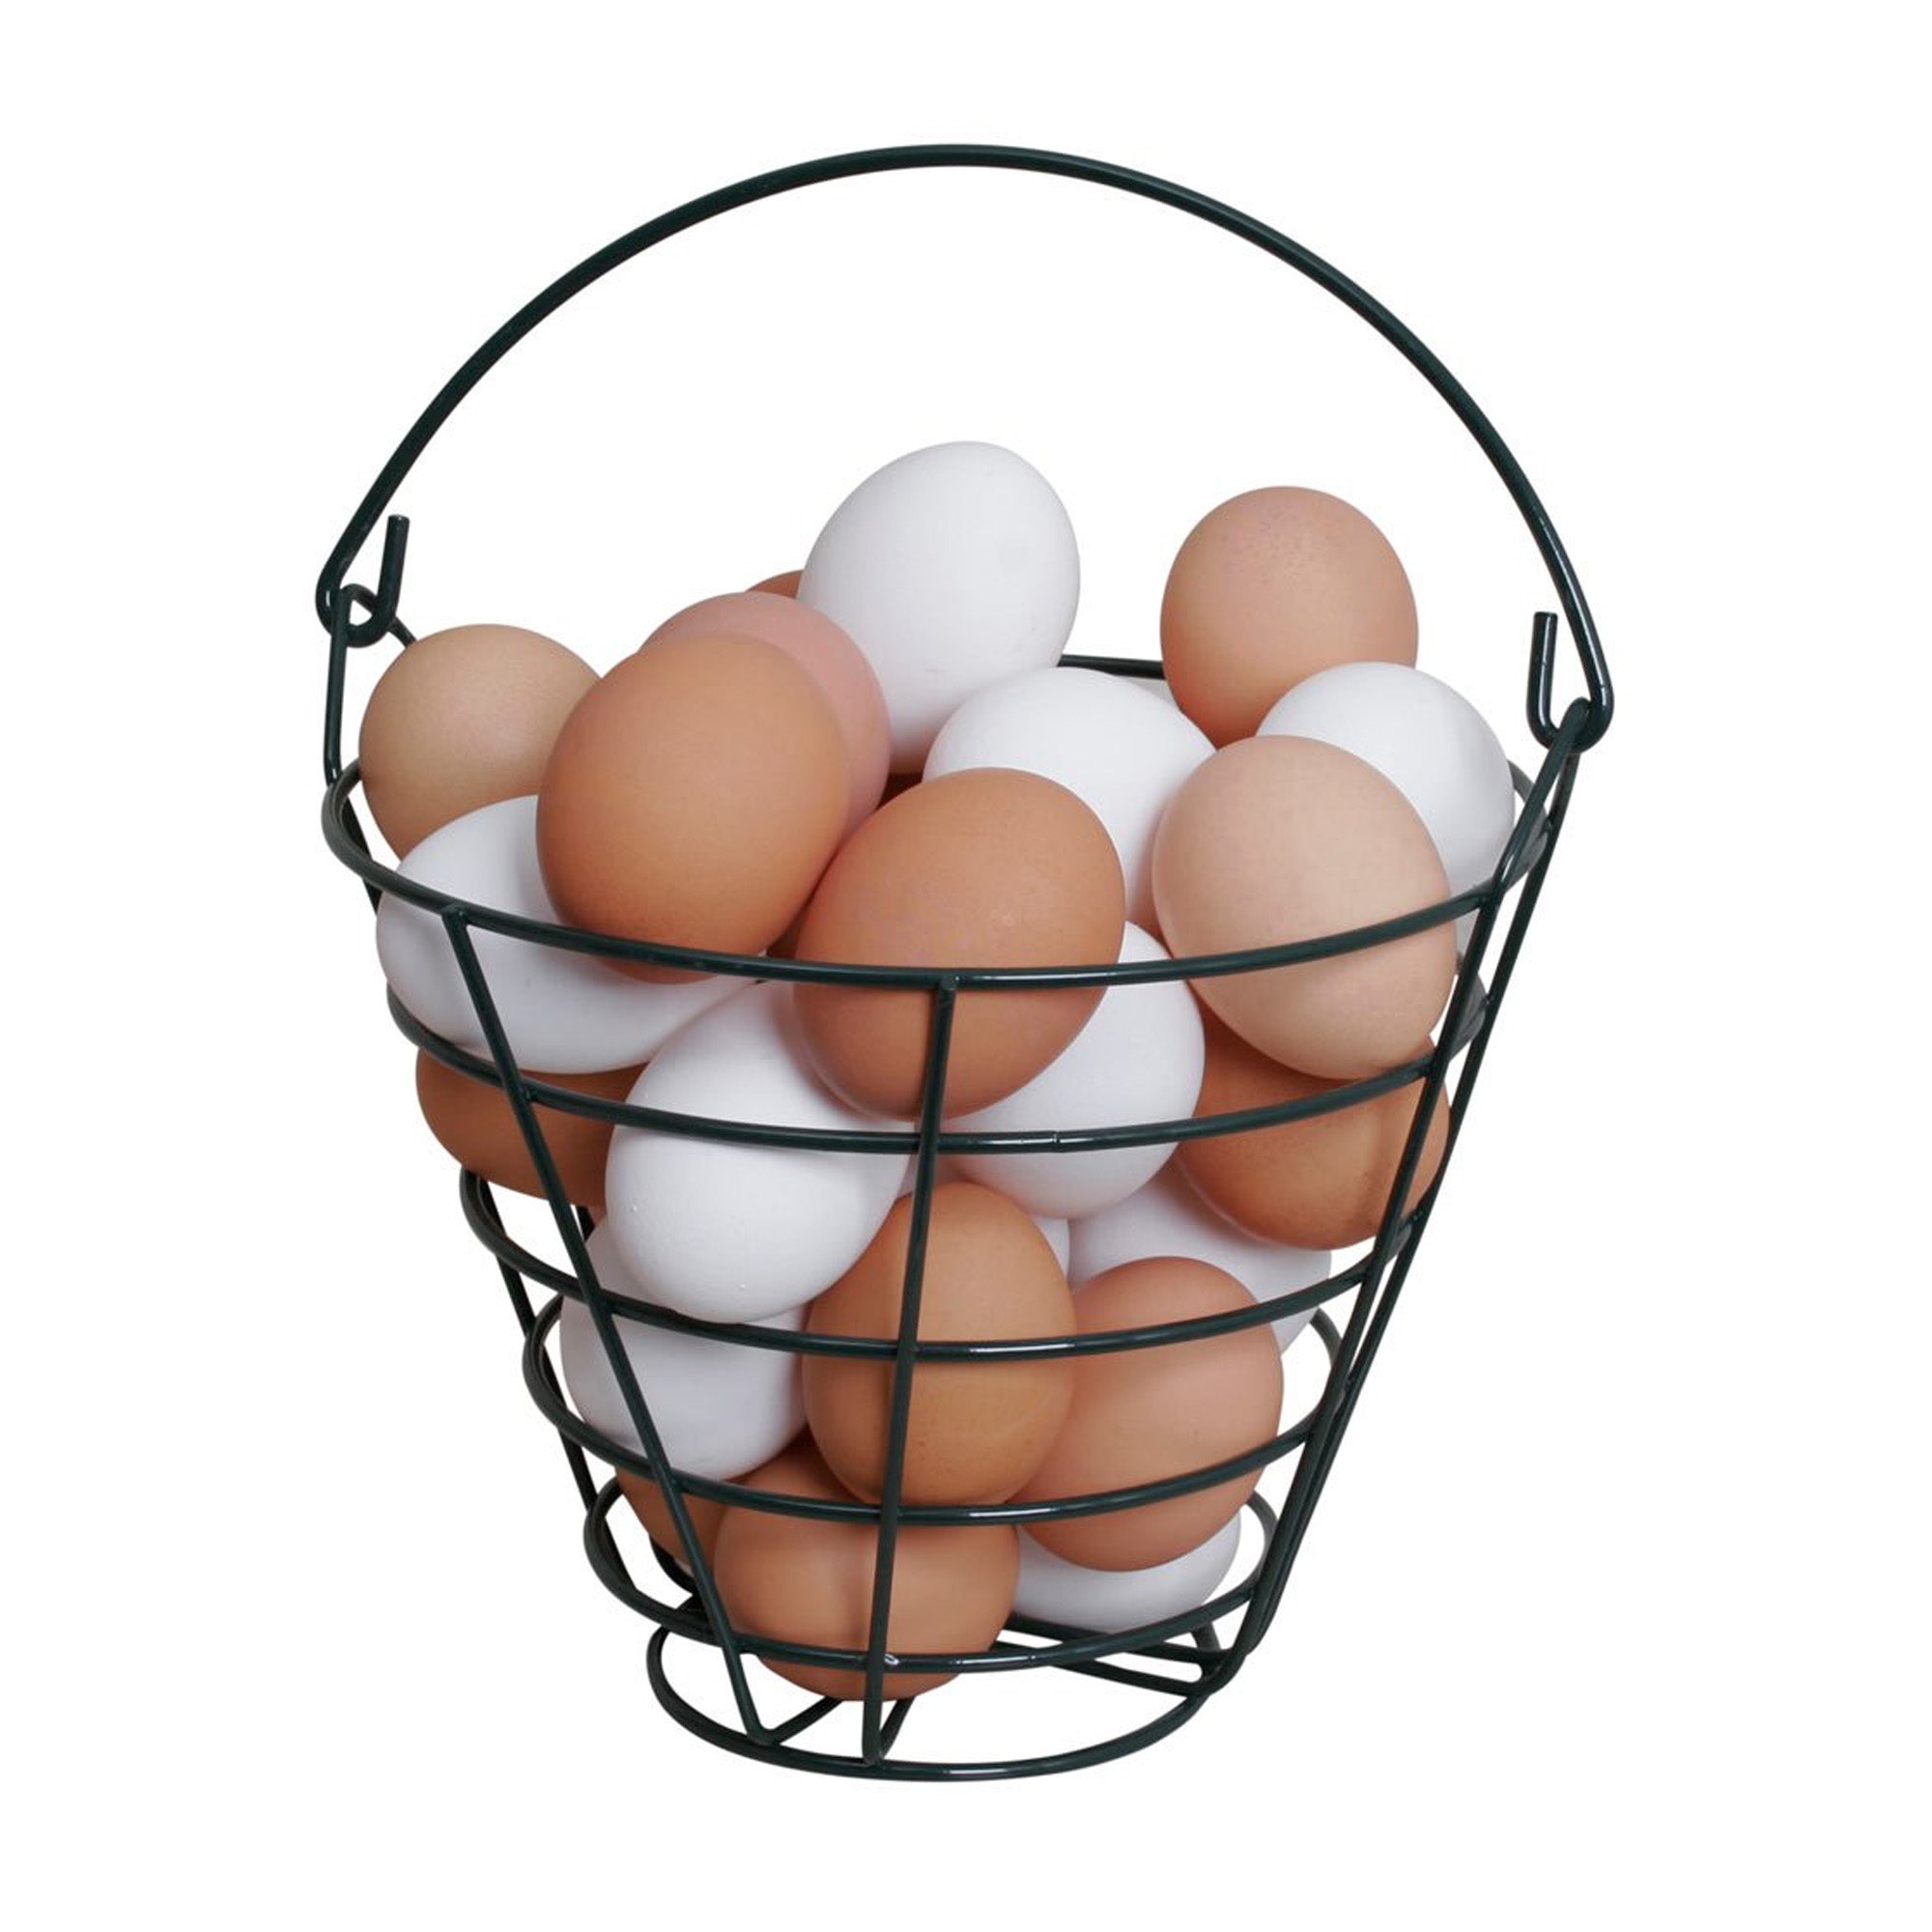 Heavy Duty Egg Basket (up to 24 eggs) - My Pet Chicken